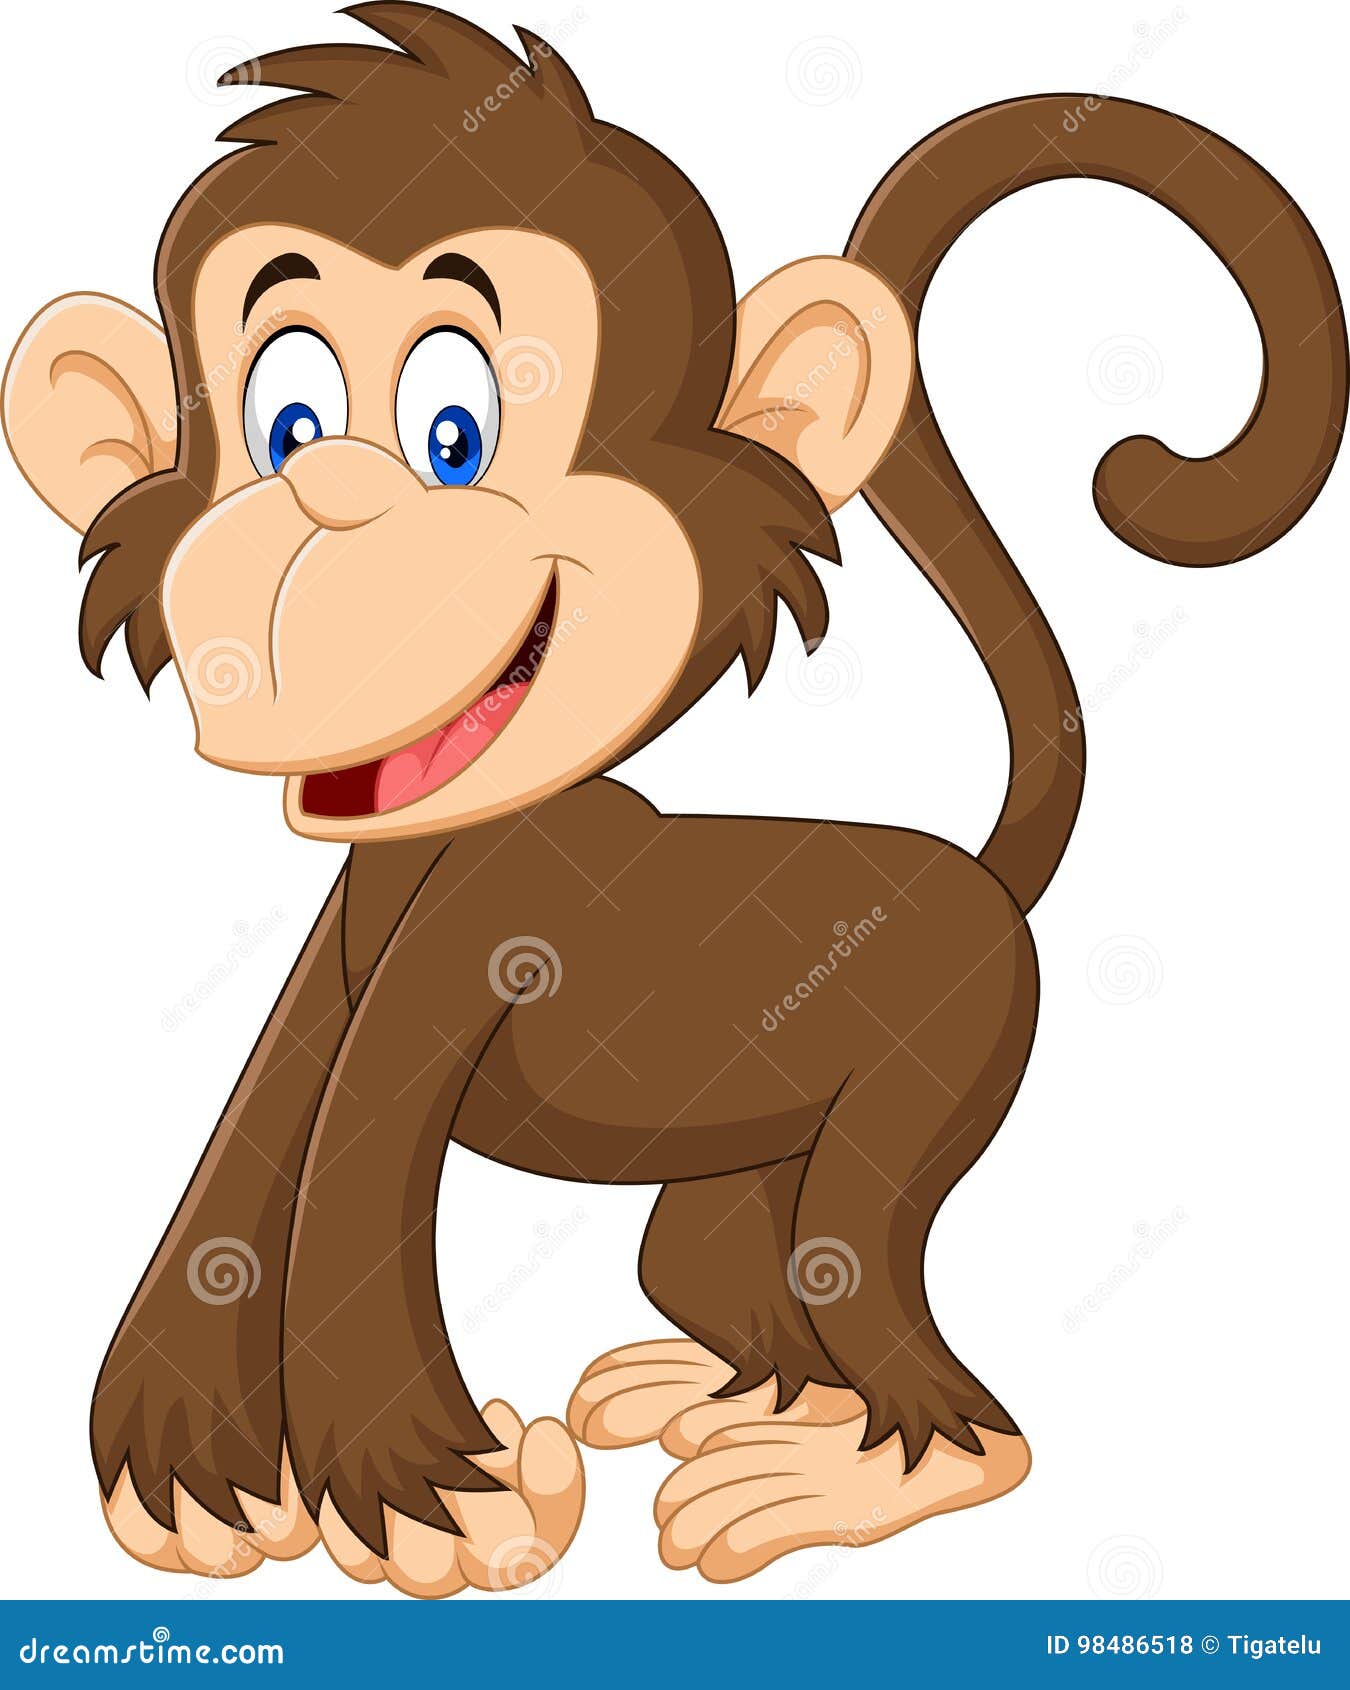 Cartoon Smiling Monkey Isolated on White Background Stock Vector -  Illustration of cute, friendly: 98486518